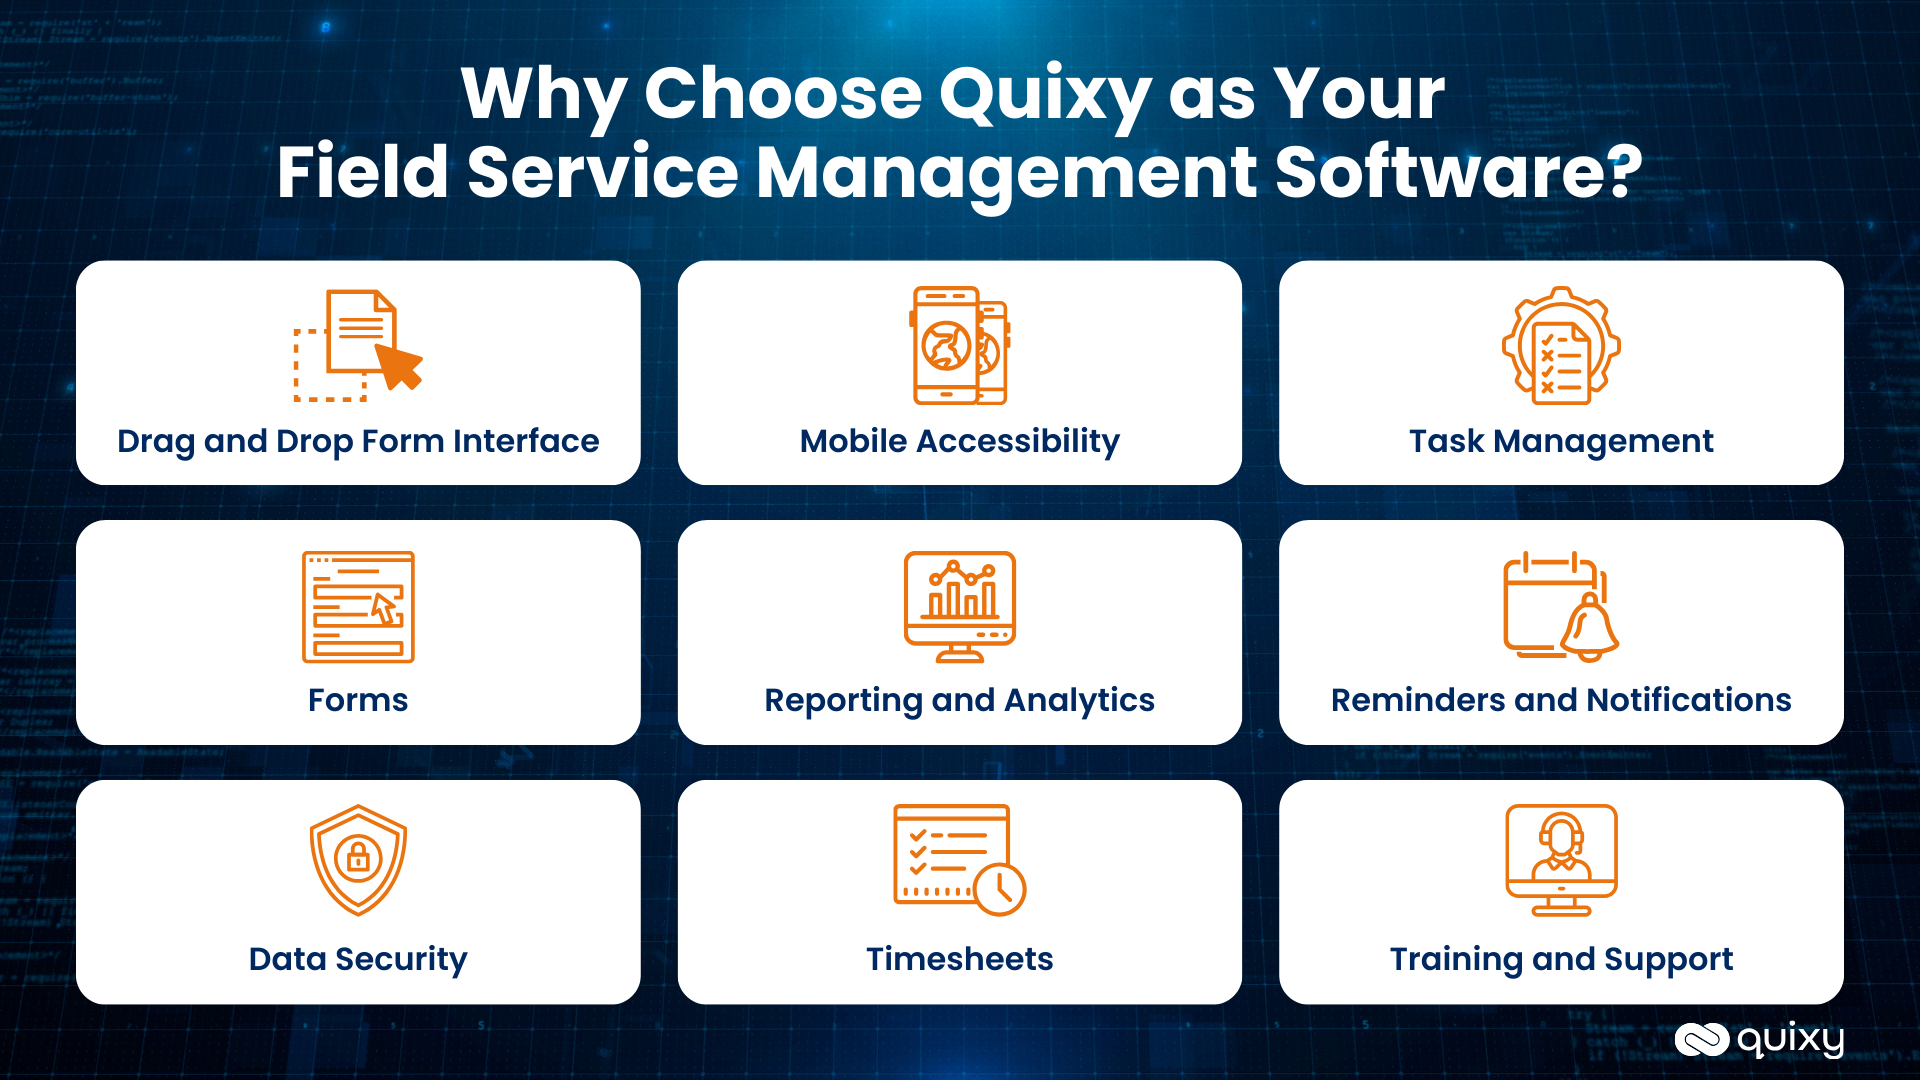 Why Choose Quixy as Your Field Service Management Software